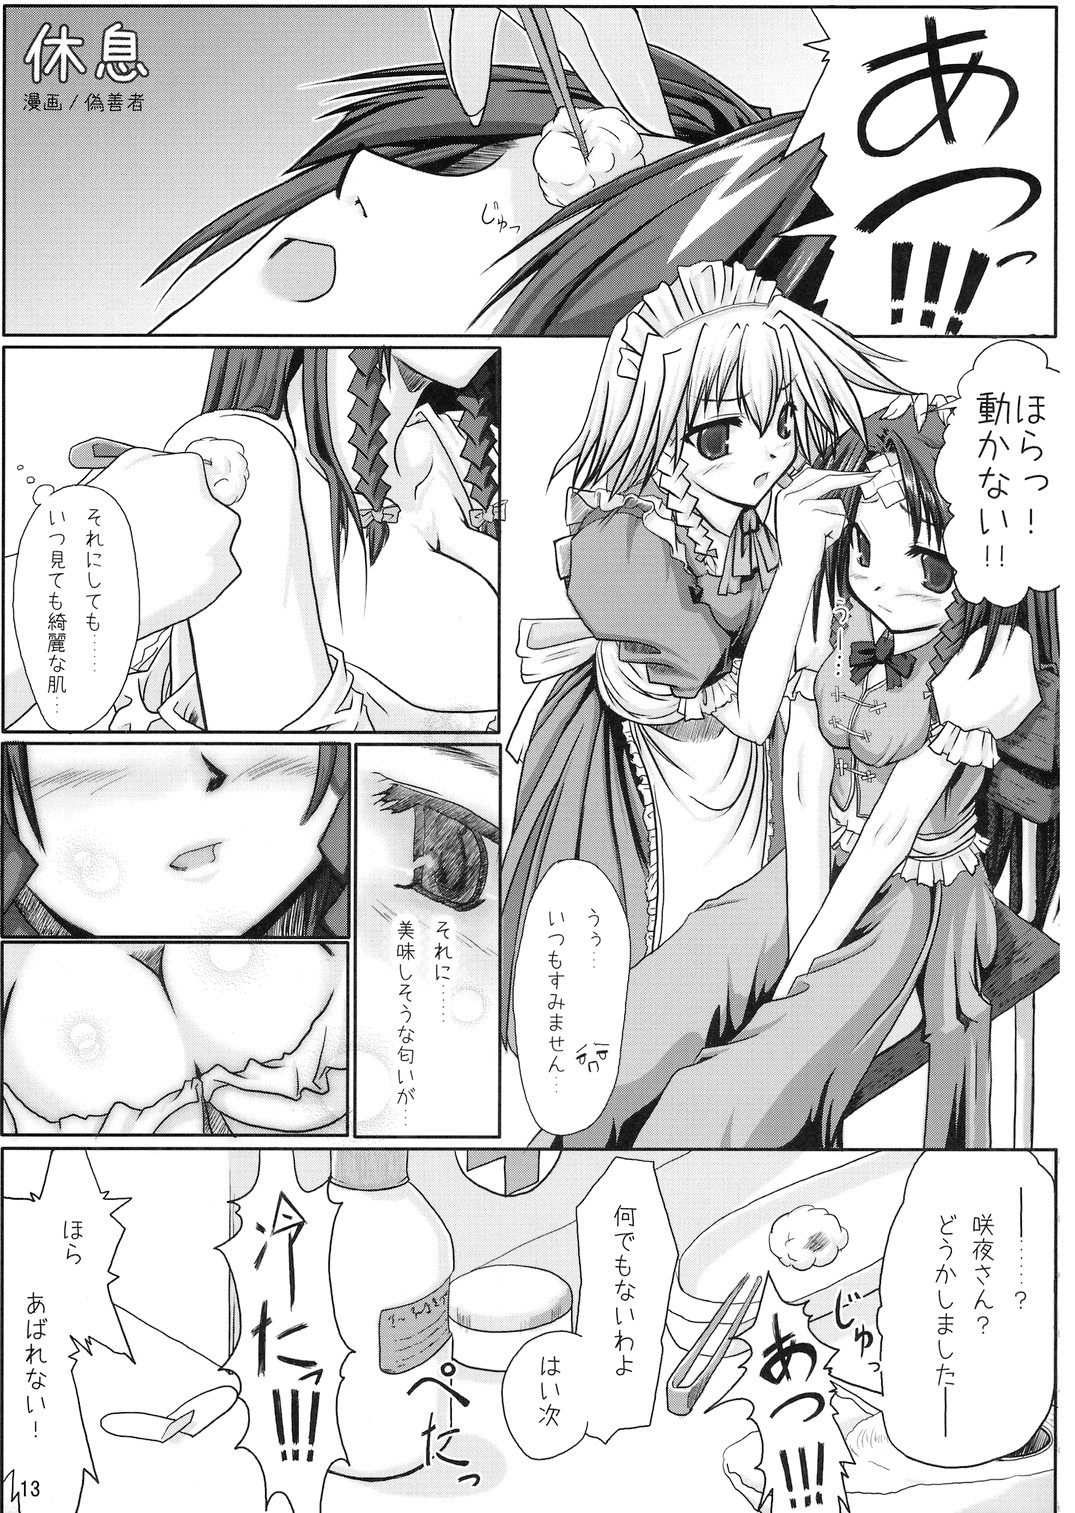 (Reitaisai 3) [Pigeon Blood (Various)] Four of a Kind (Touhou Project) page 13 full